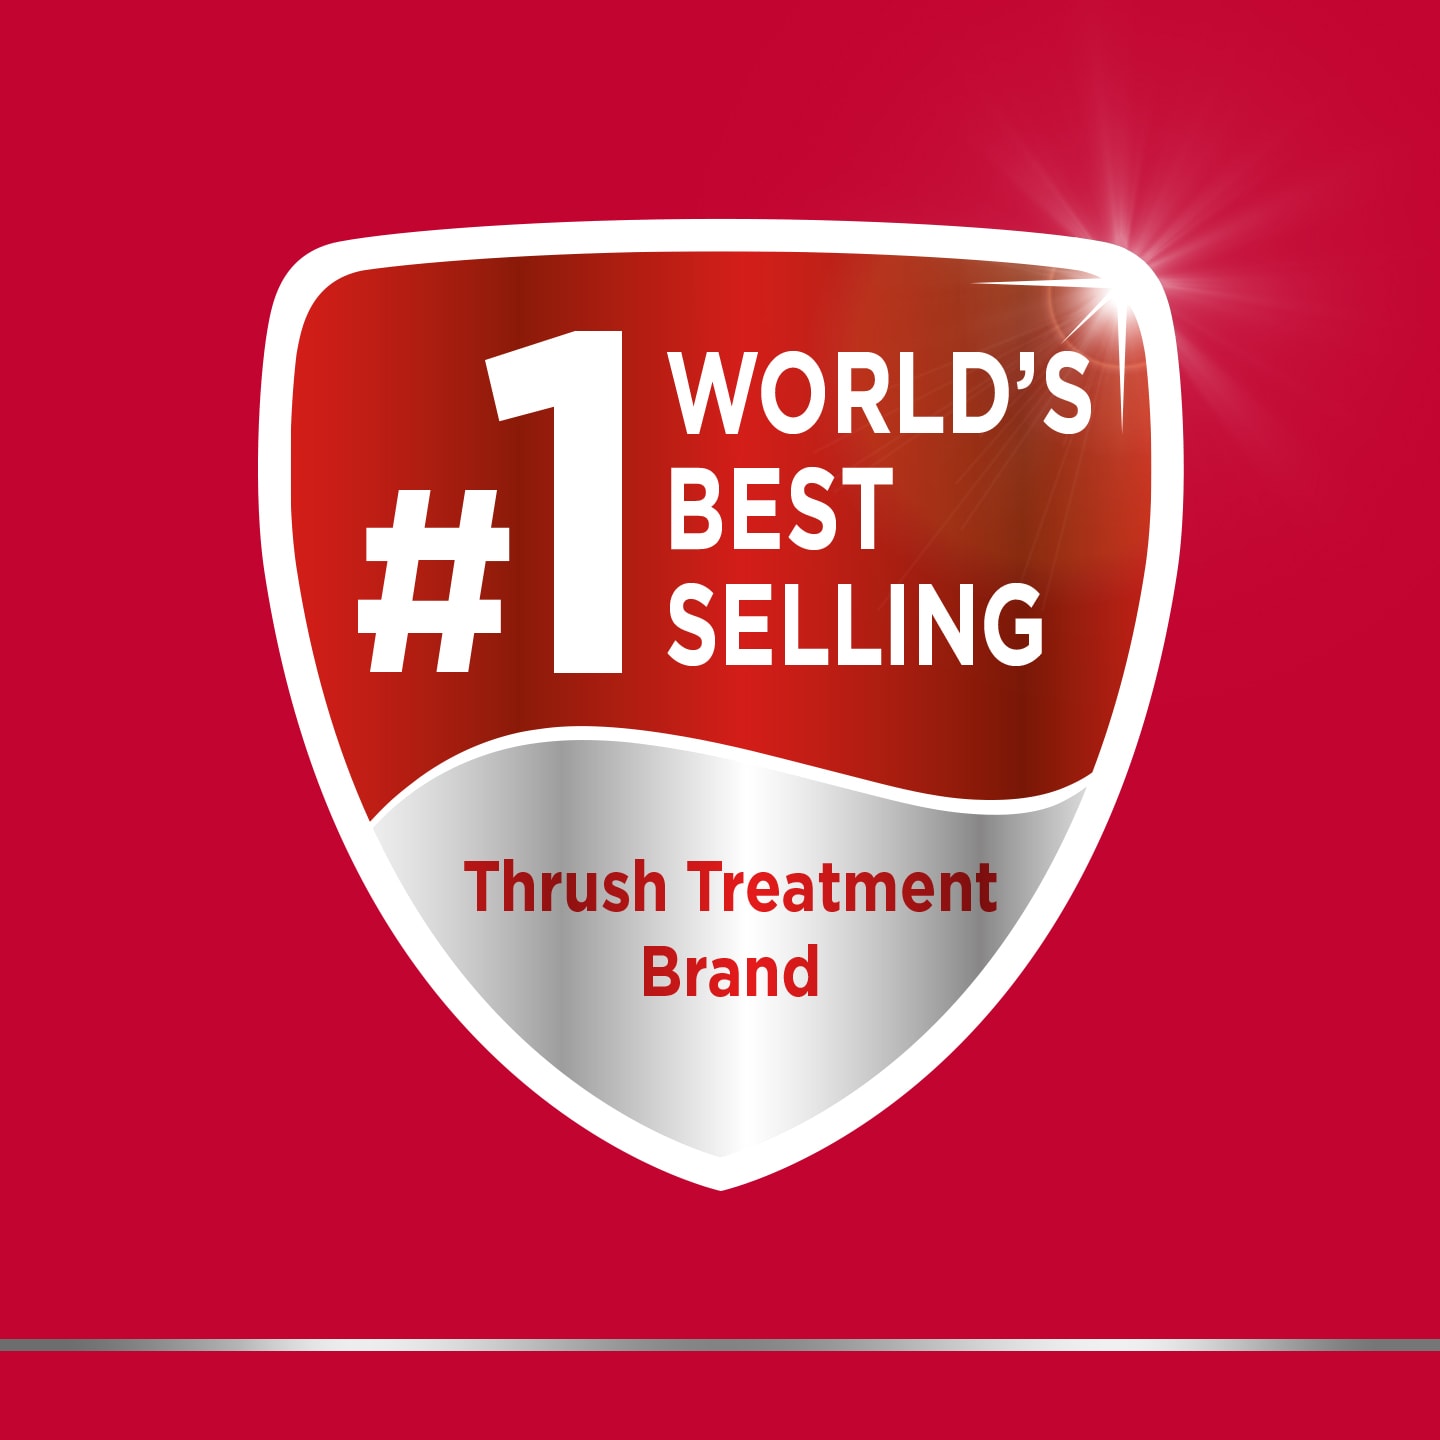 Canesten badge: #1 World’s best selling Thrush Treatment Brand and caption below: